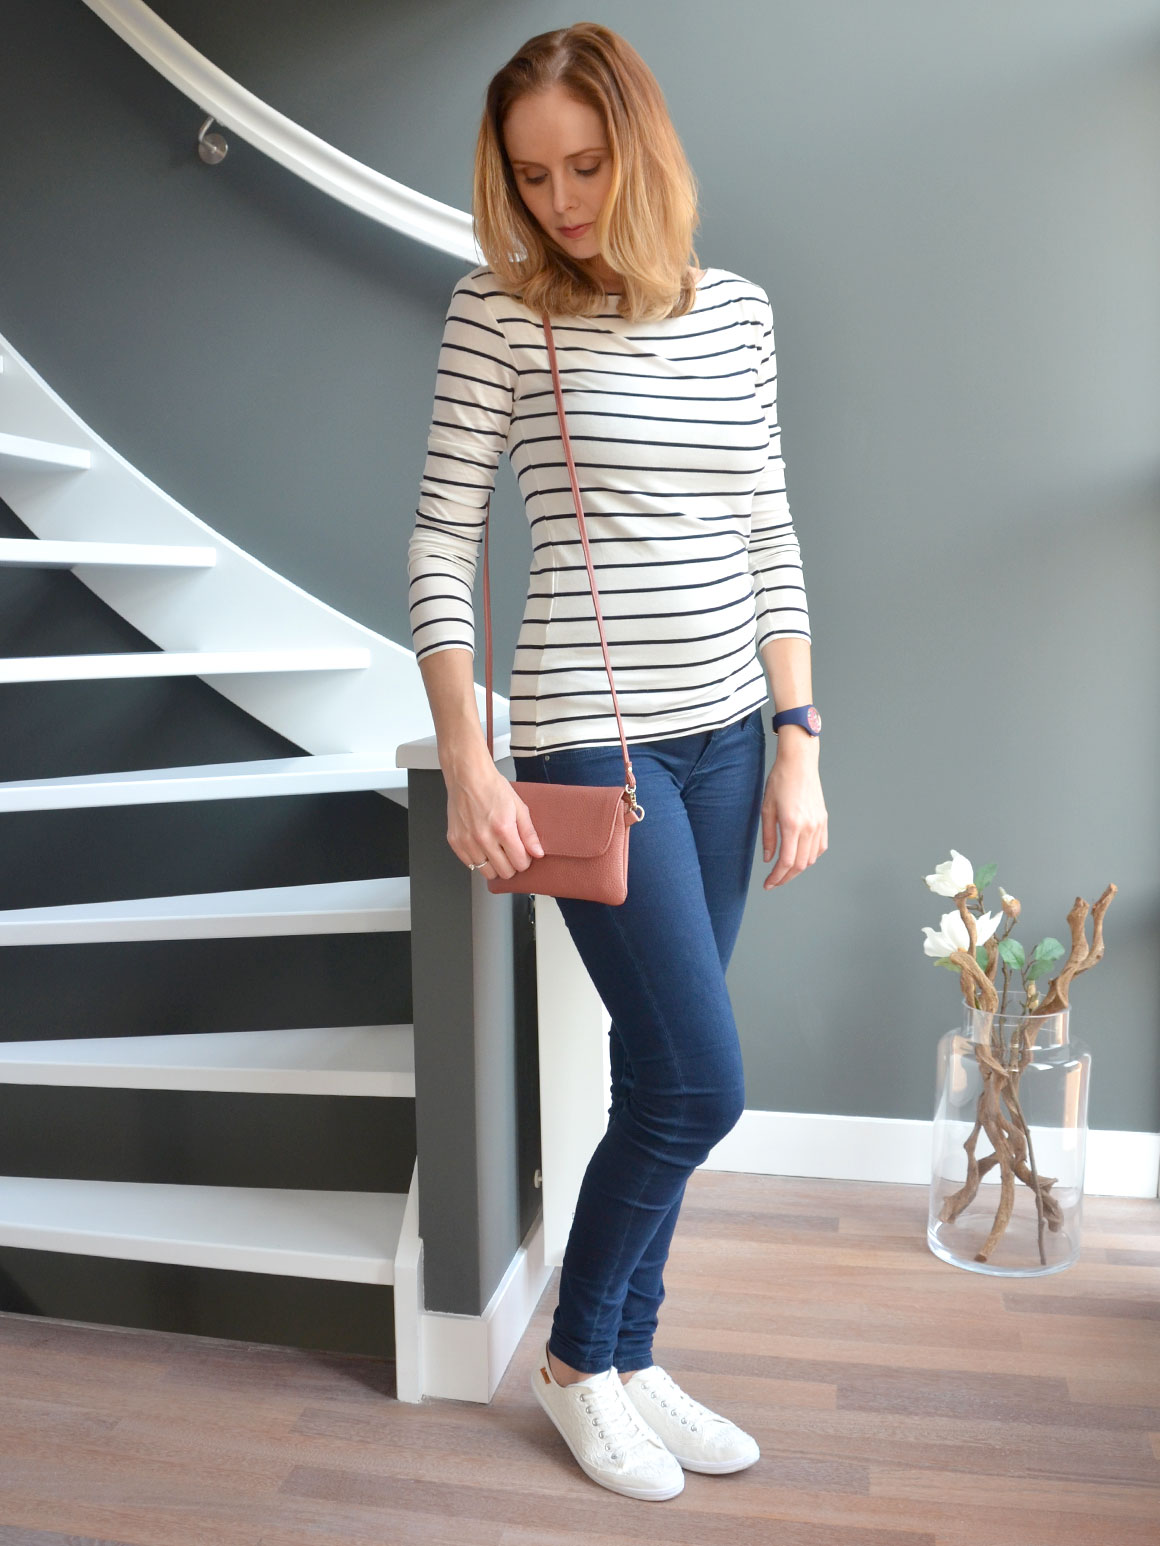 Outfit: Lace & Stripes